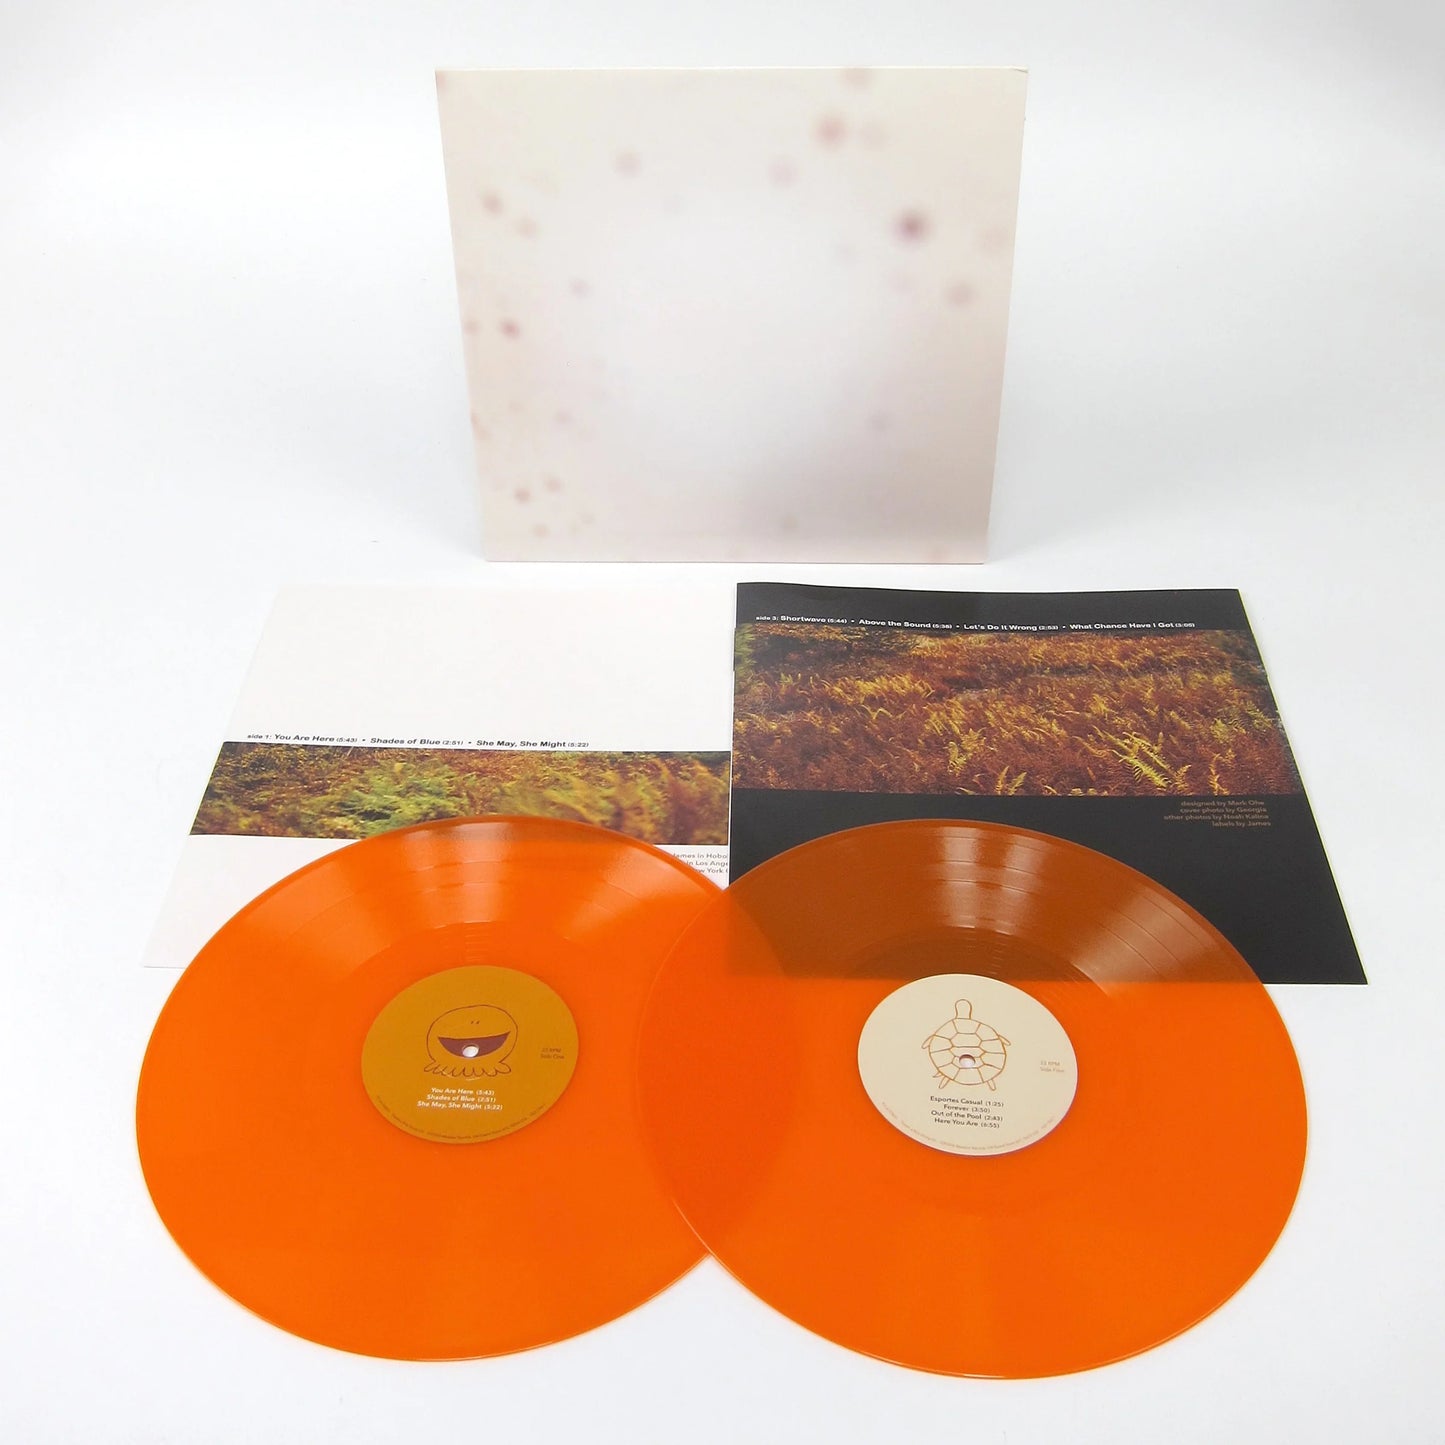 Yo La Tengo- There's a Riot Going On (Limited Edition on Double Orange Vinyl)